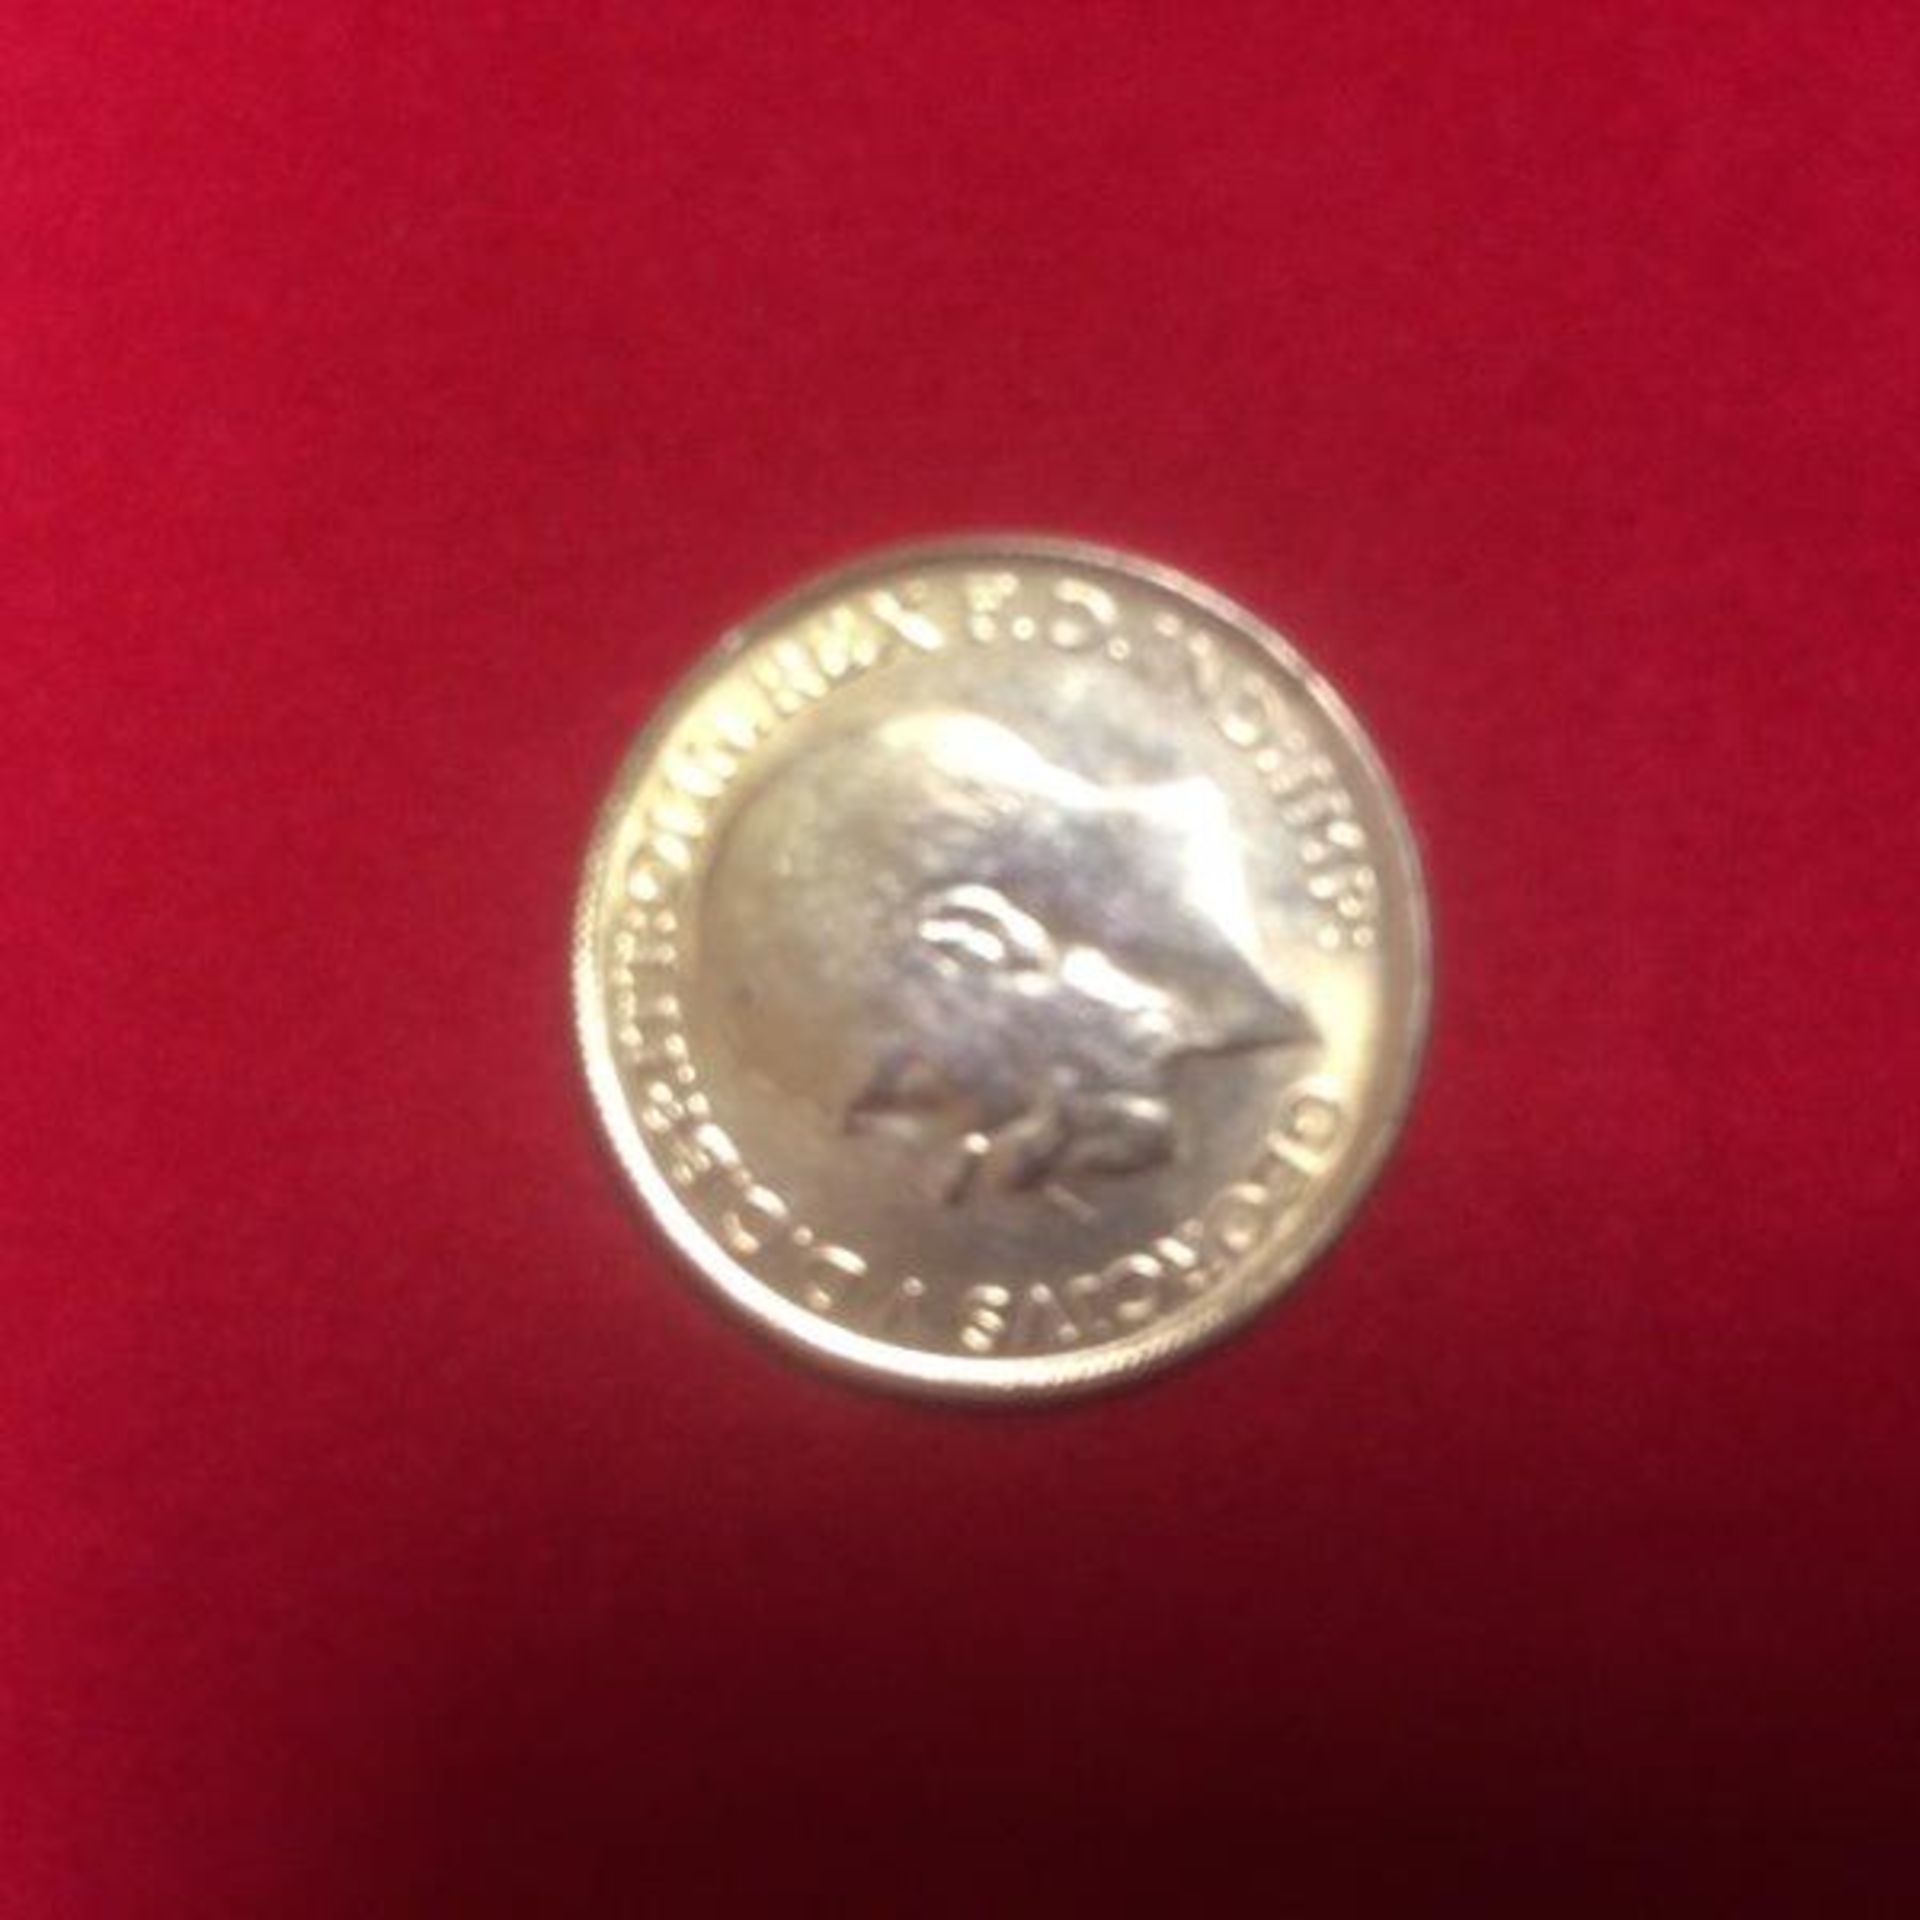 1917 George Full Sovereign Gold Coin - Image 3 of 3